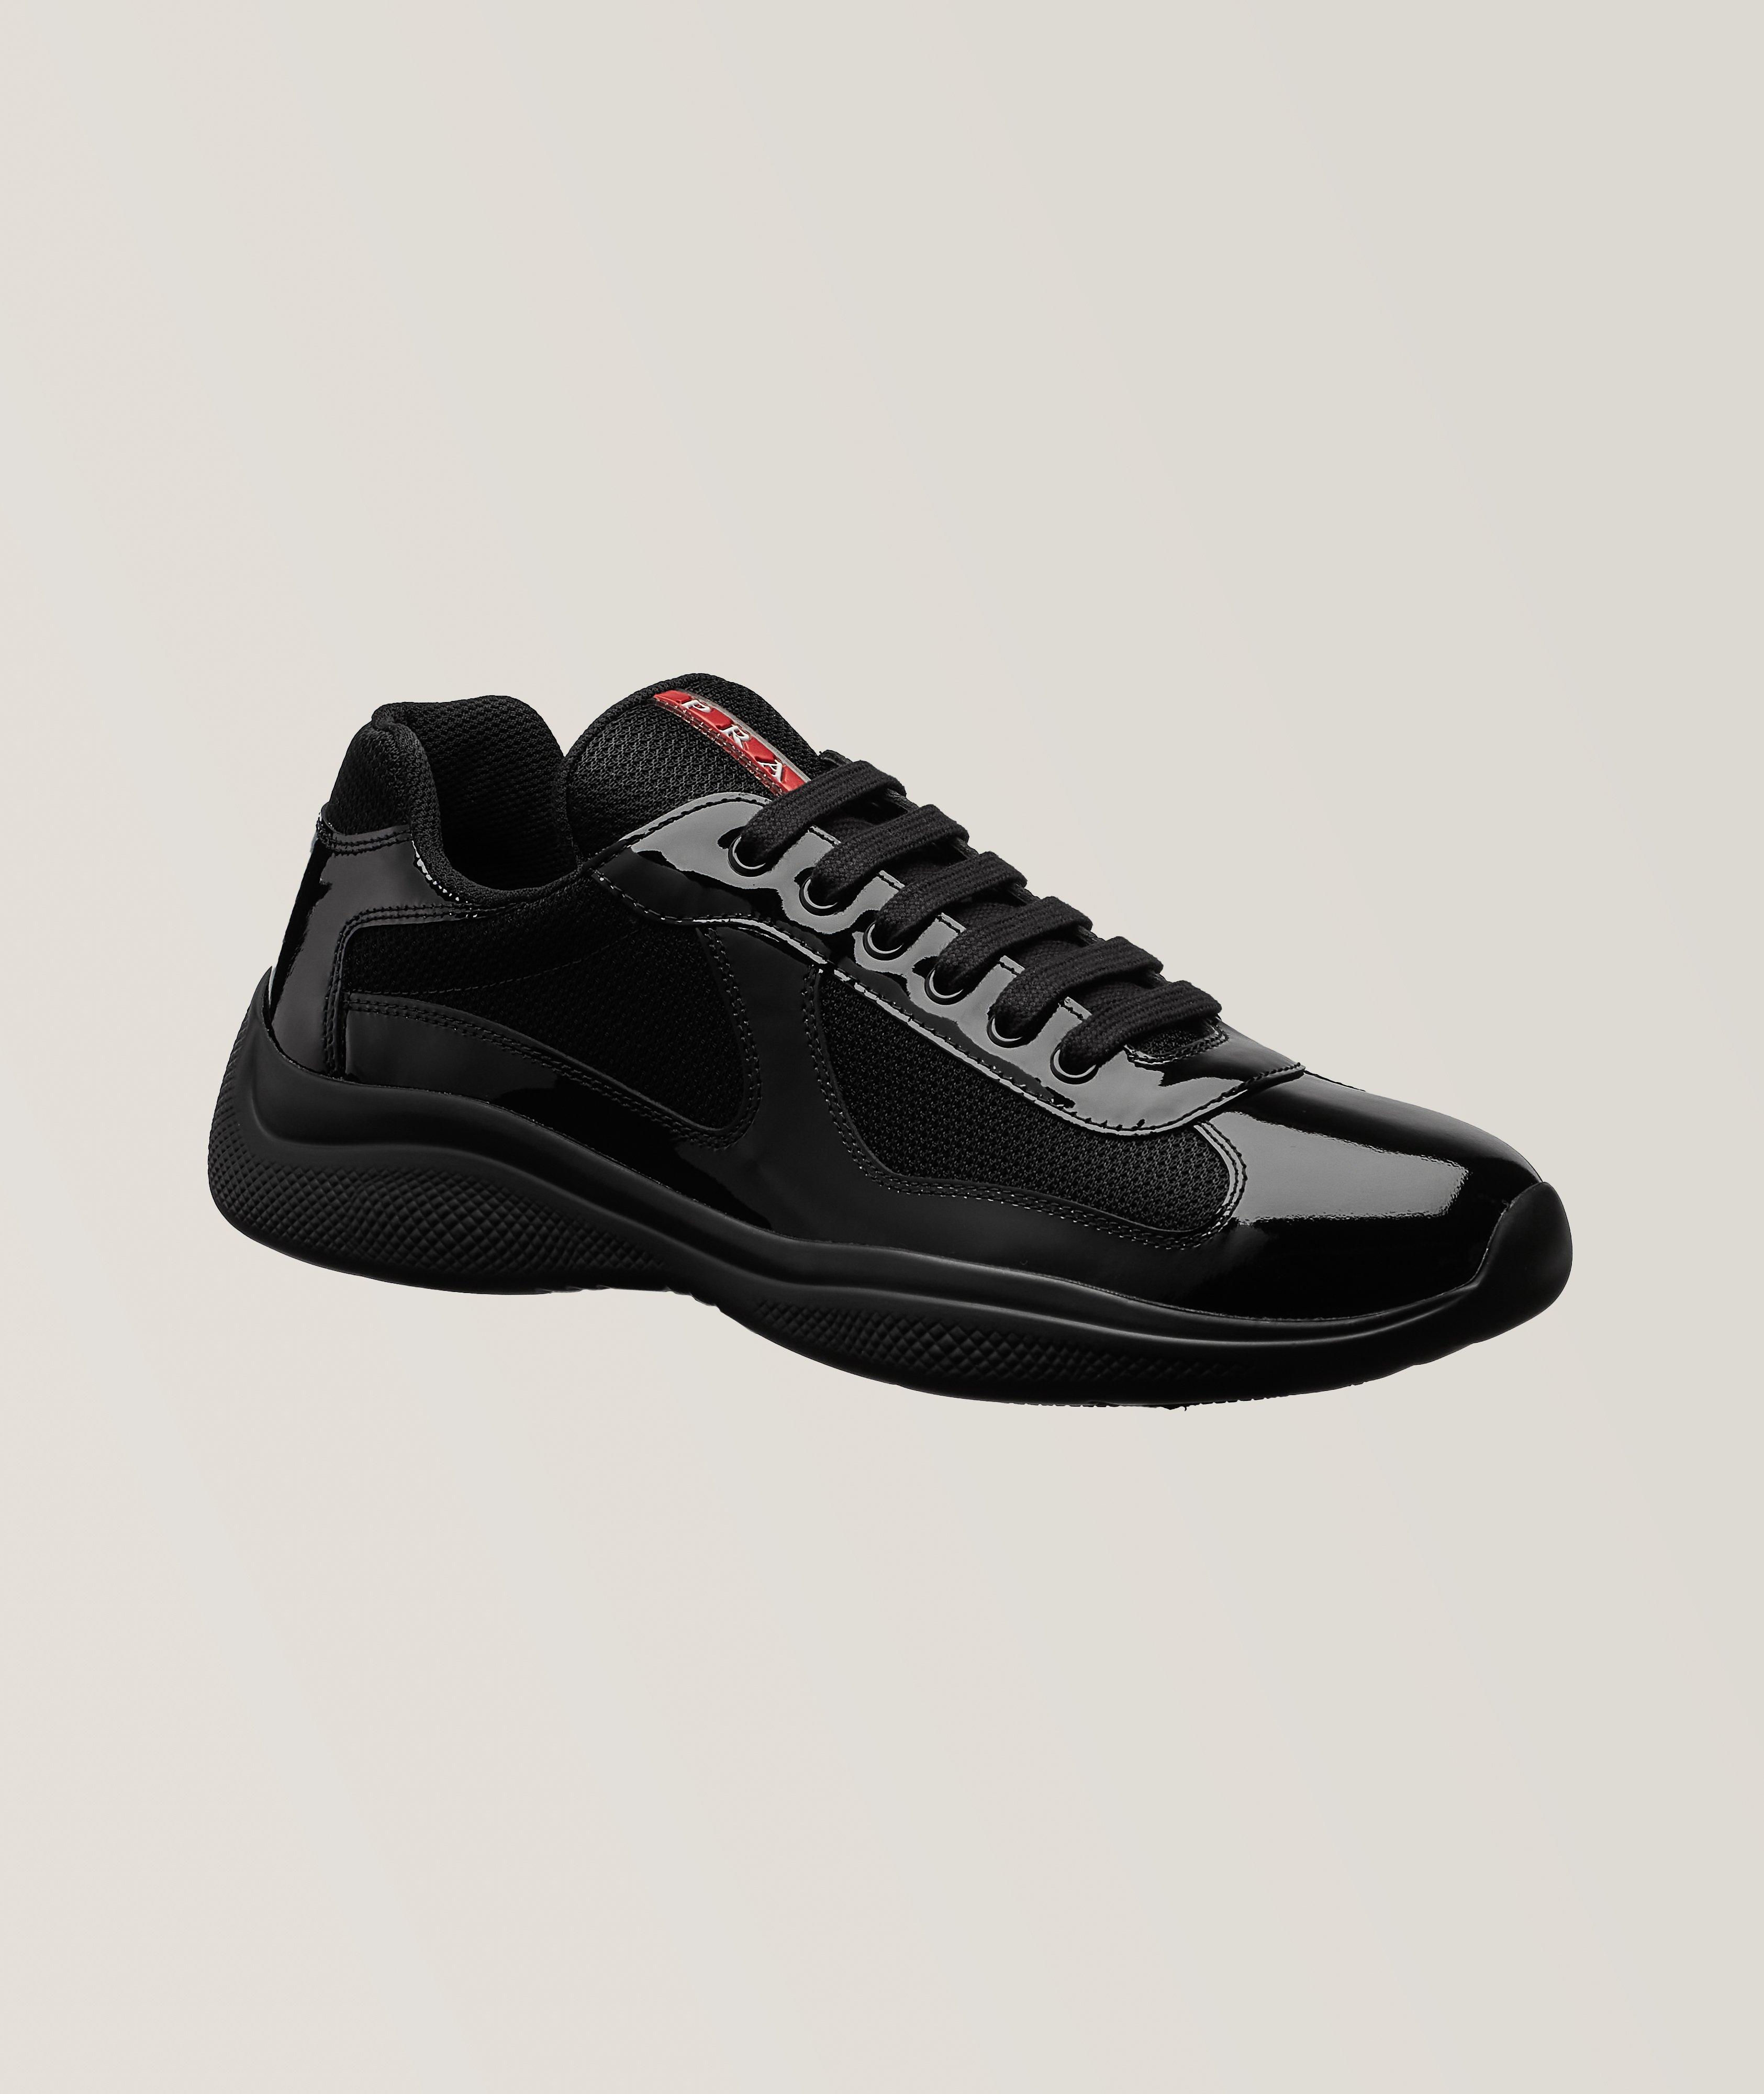 America's Cup Mixed Material Sneakers image 0